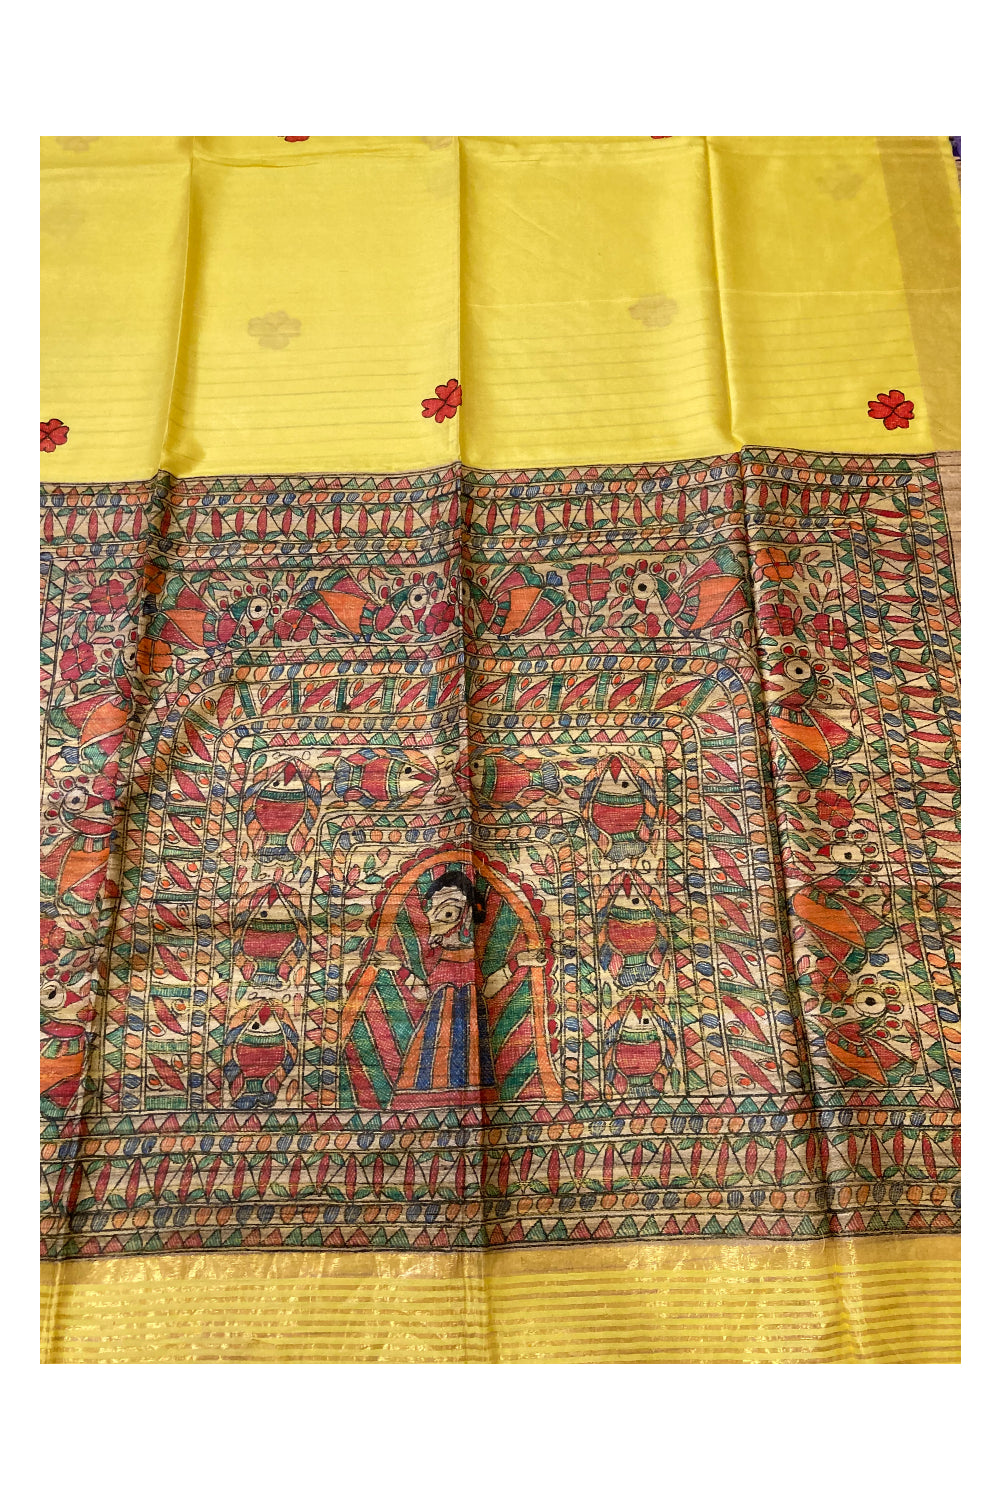 Southloom Soft Silk Yellow Saree with Multi-Coloured Art Works on Pallu